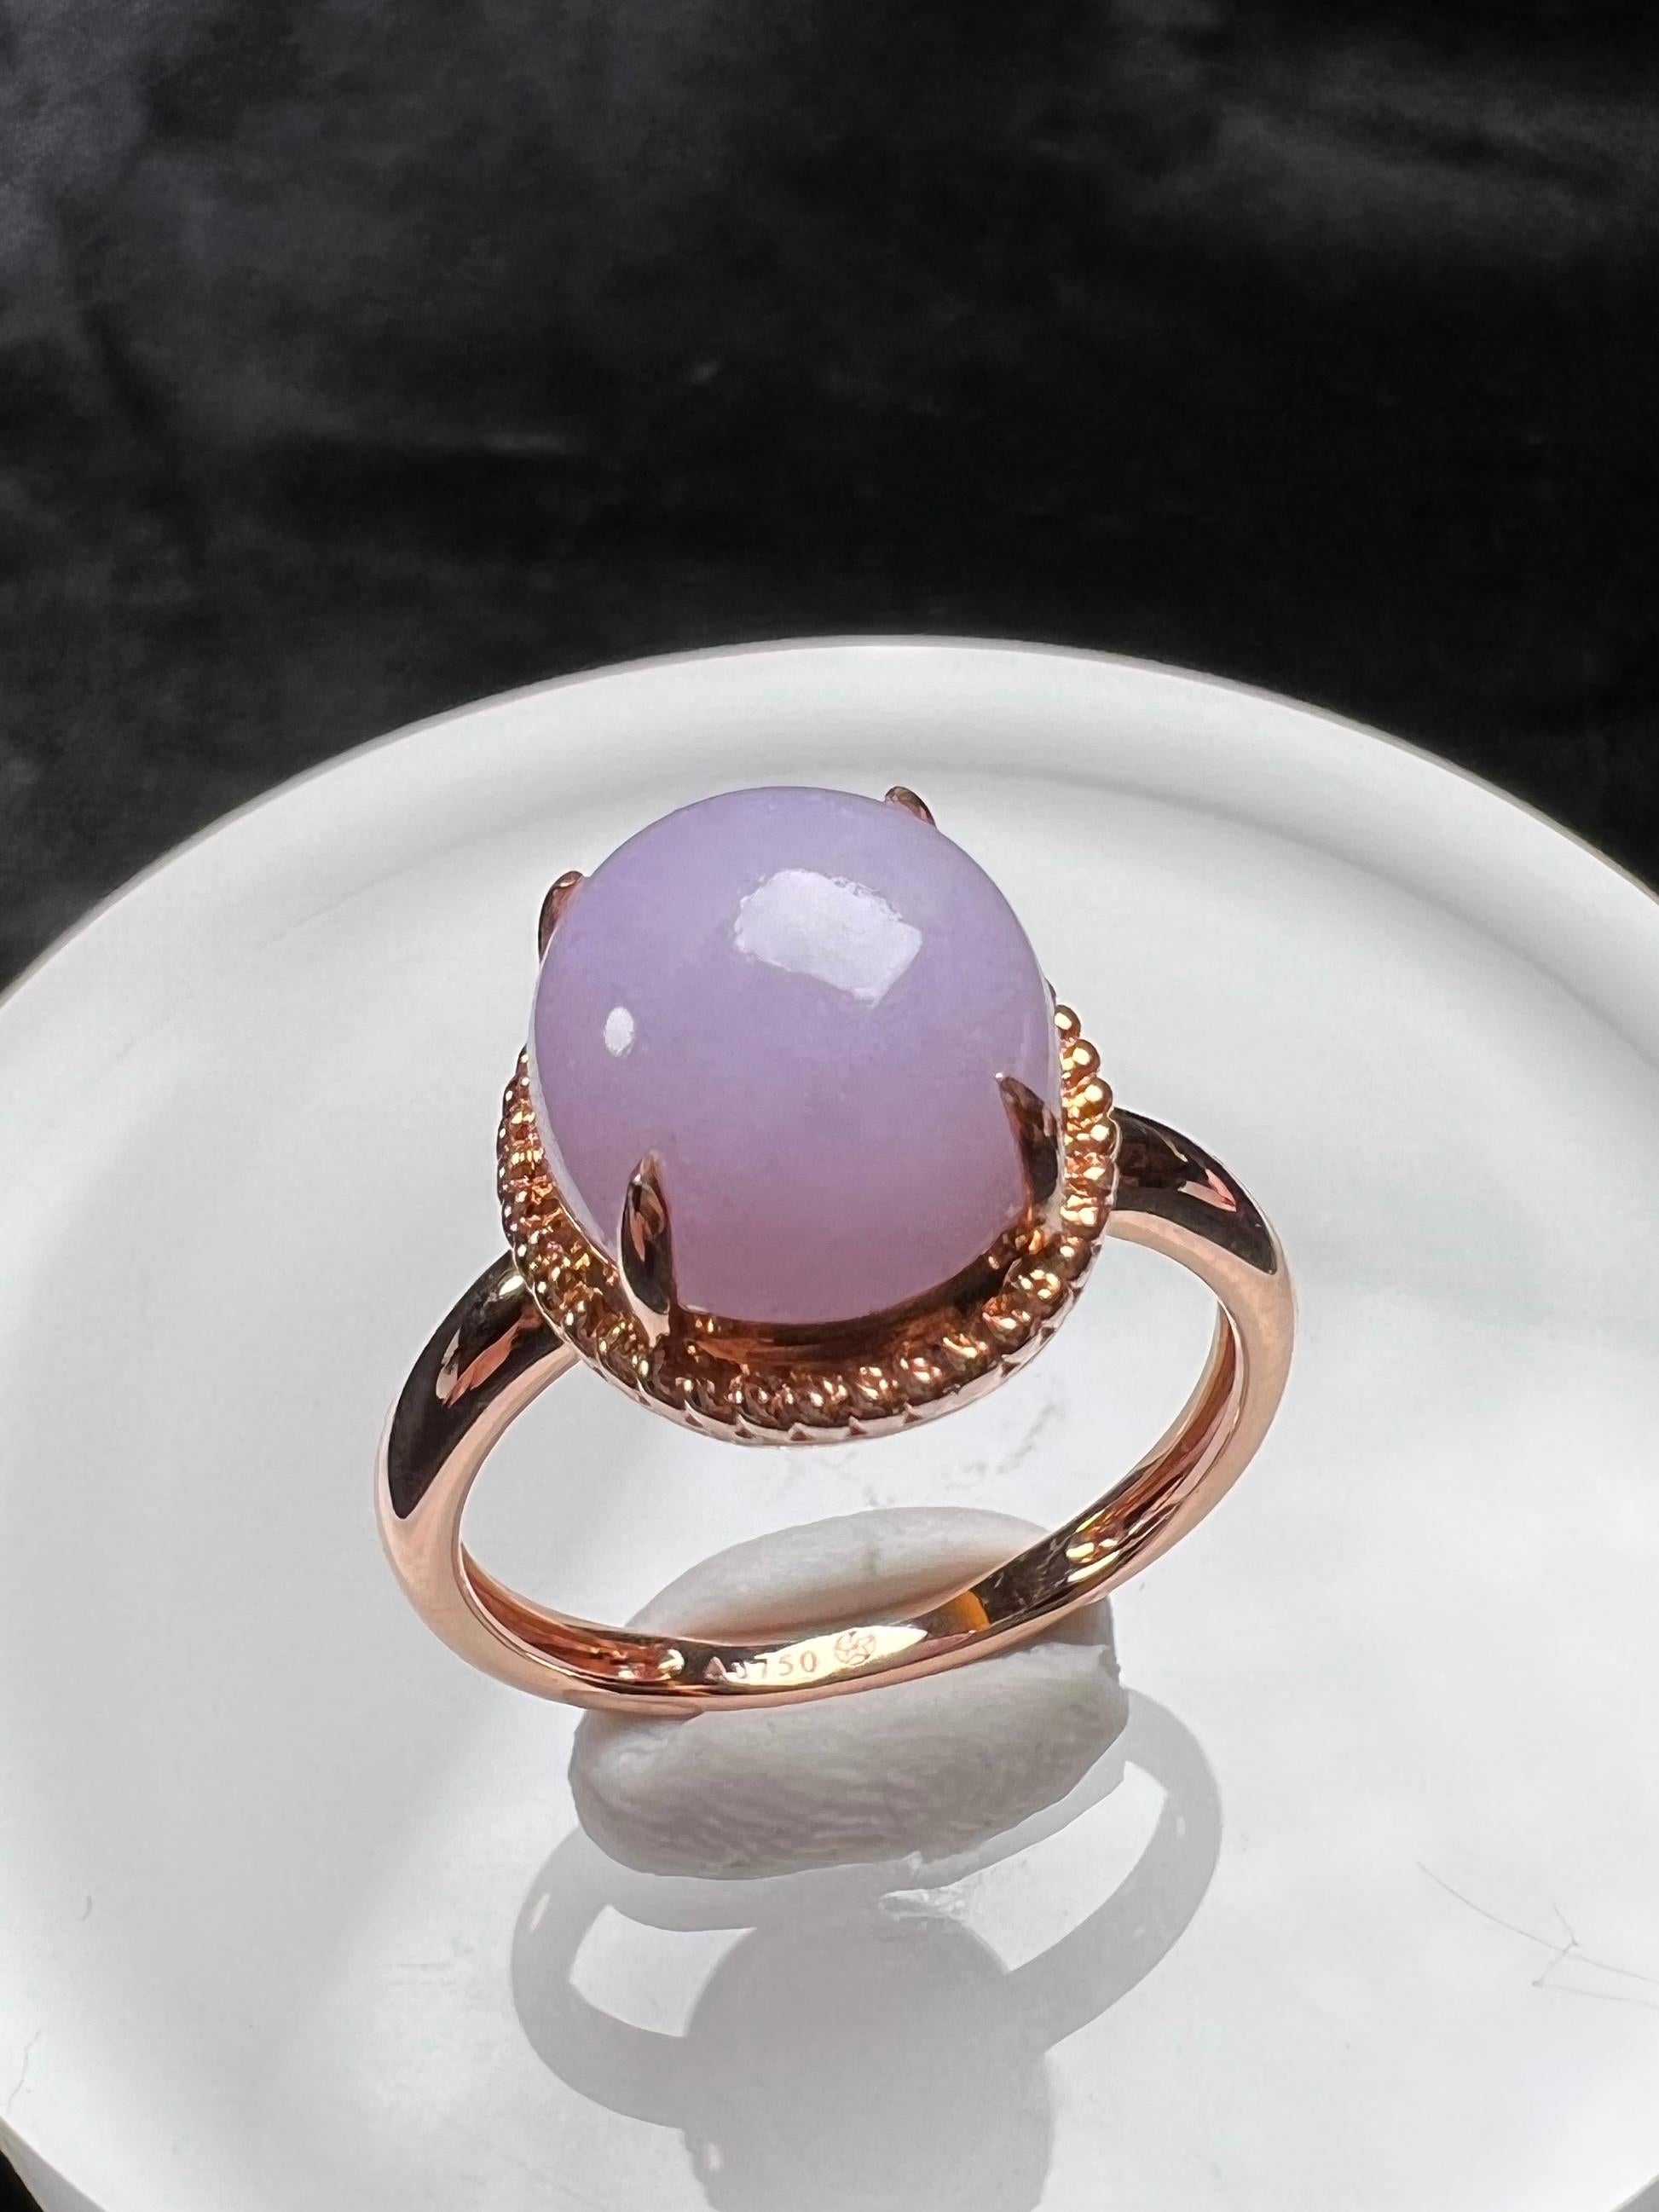 18K Rose Gold Oval Lavender Jadeite Ring, Engagement Ring

Total weight (approx.): 3.3g
Centre setting measurement (approx.): 10.2*9.4mm

This ring is resizable.
Get in touch with us to know more details and your shipping options.

The 18K Rose Gold